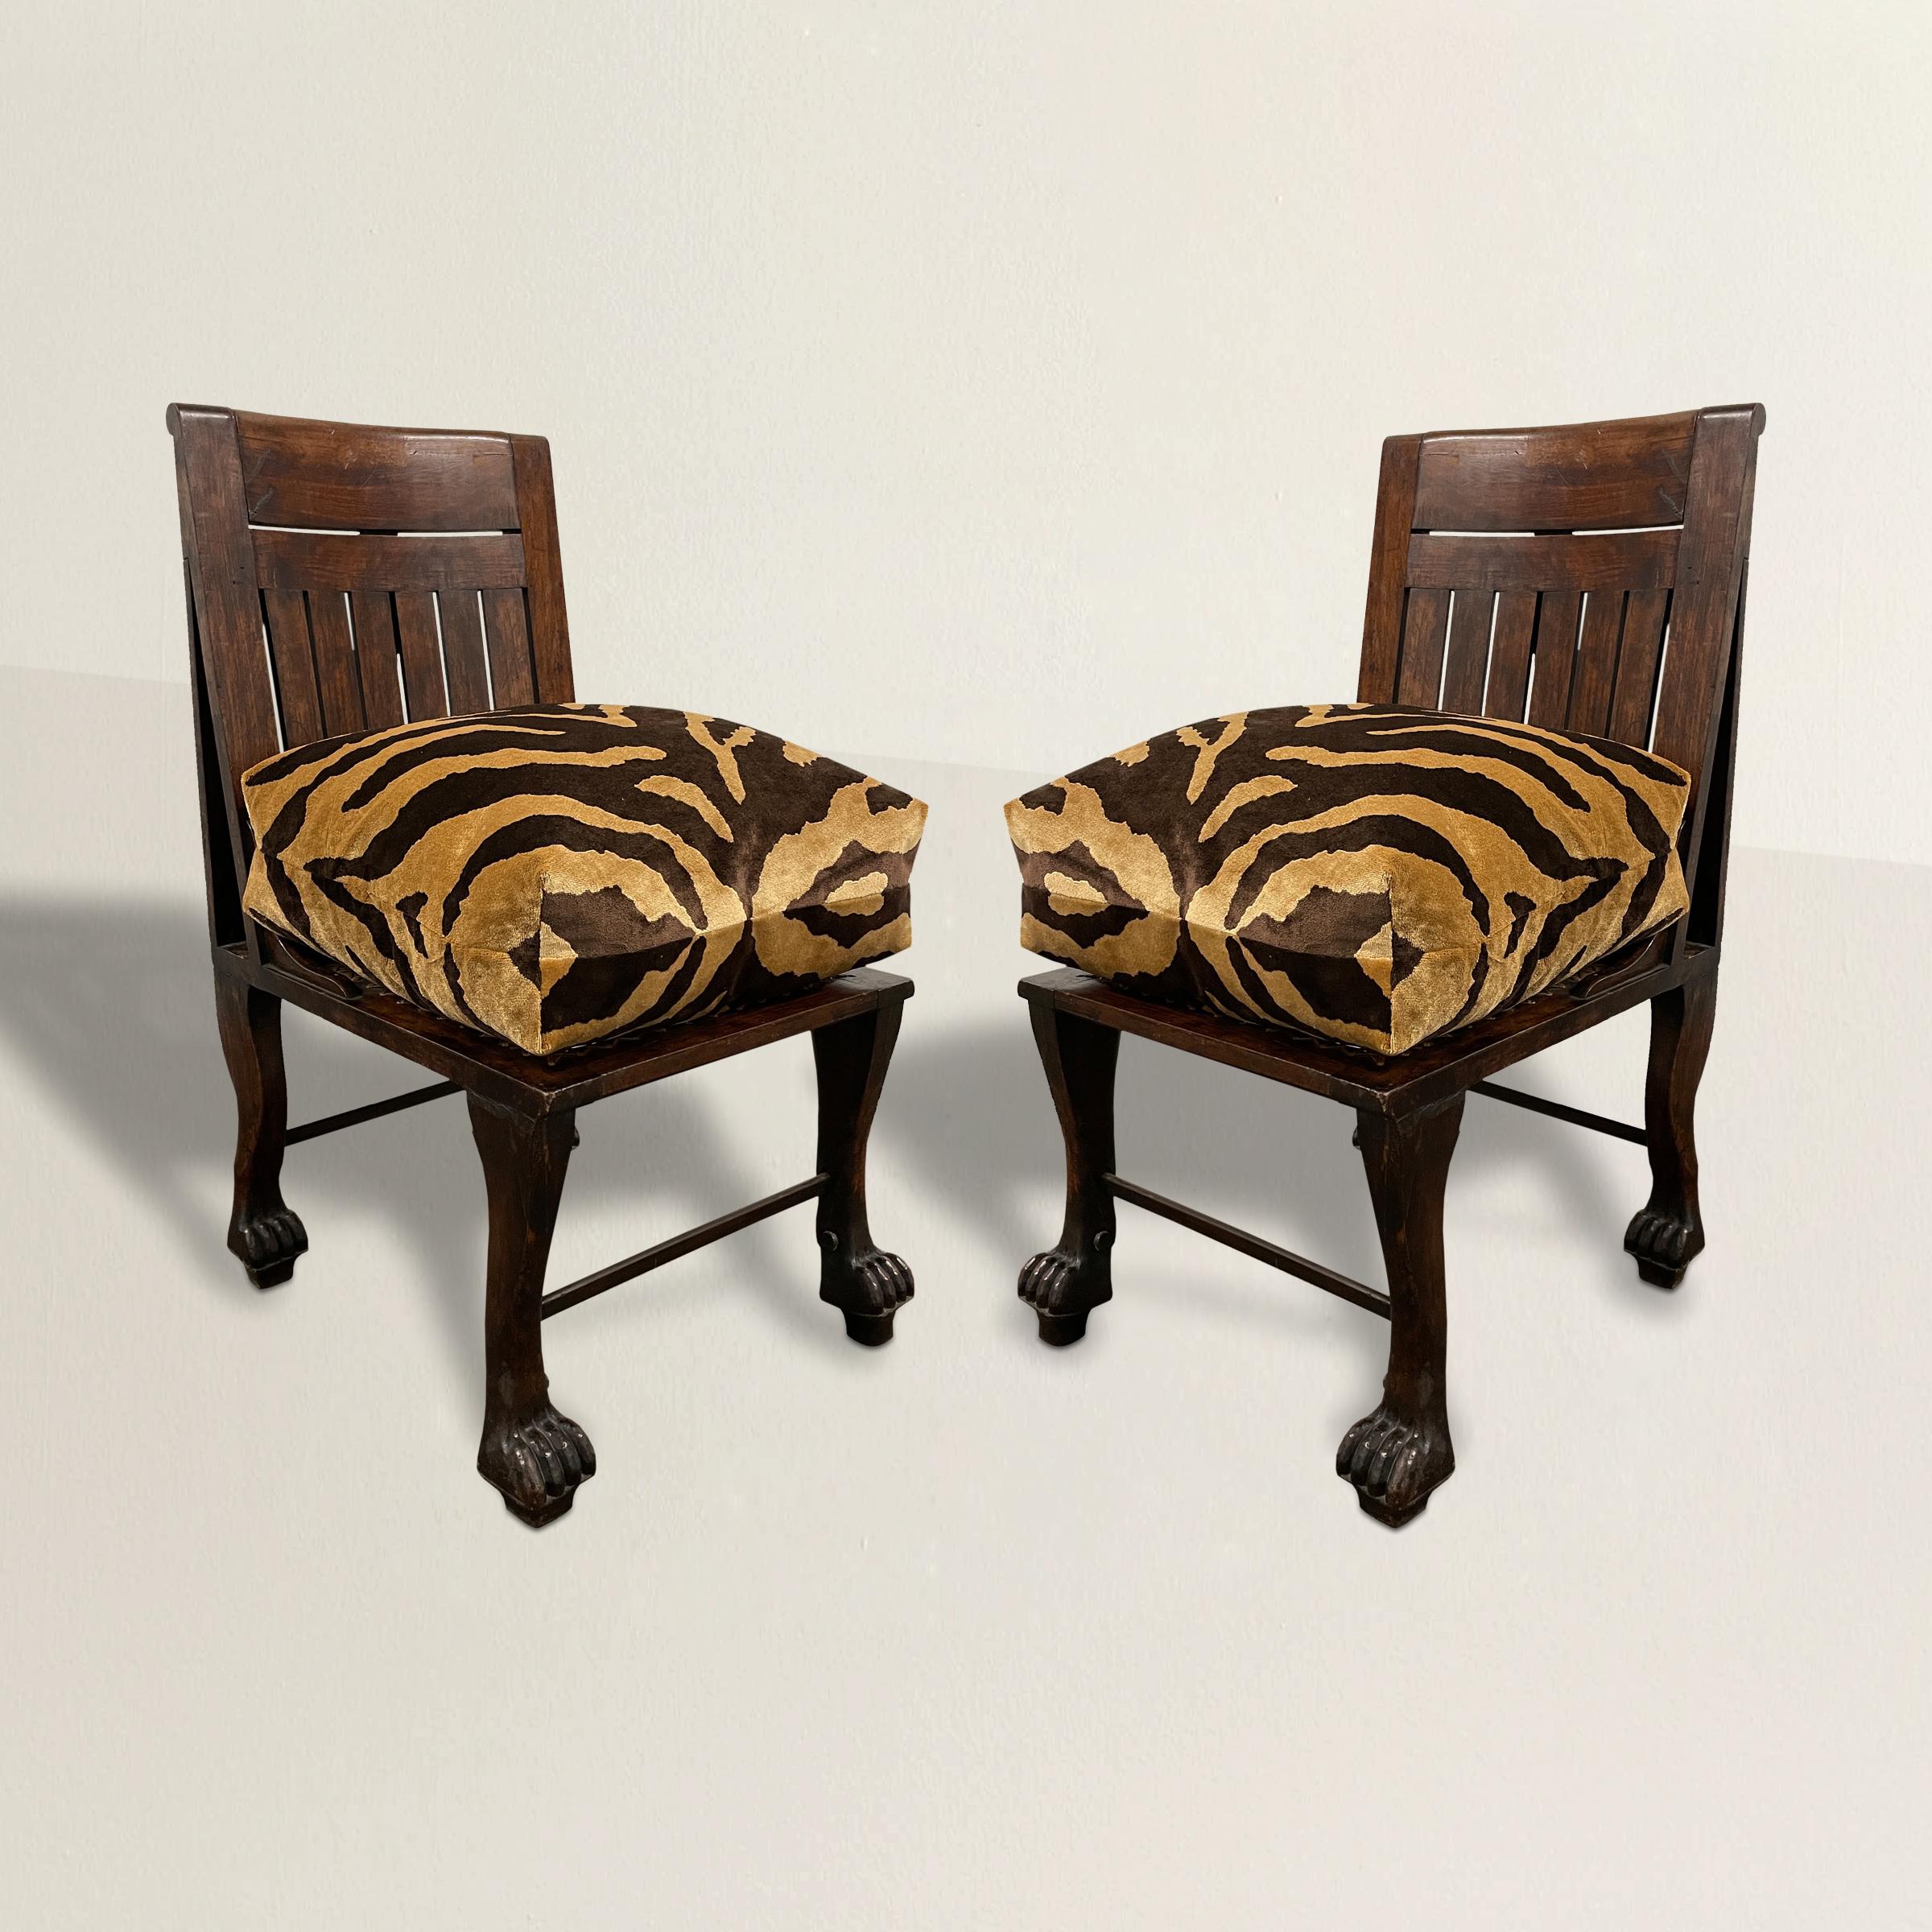 An incredibly rare pair of early 20th century English Egyptian Revival slipper chairs inspired by an Egyptian 18th Dynasty chair discovered in 1905. The frames are carved of walnut and feature legs carved to imitate the fore and hind legs of lions,